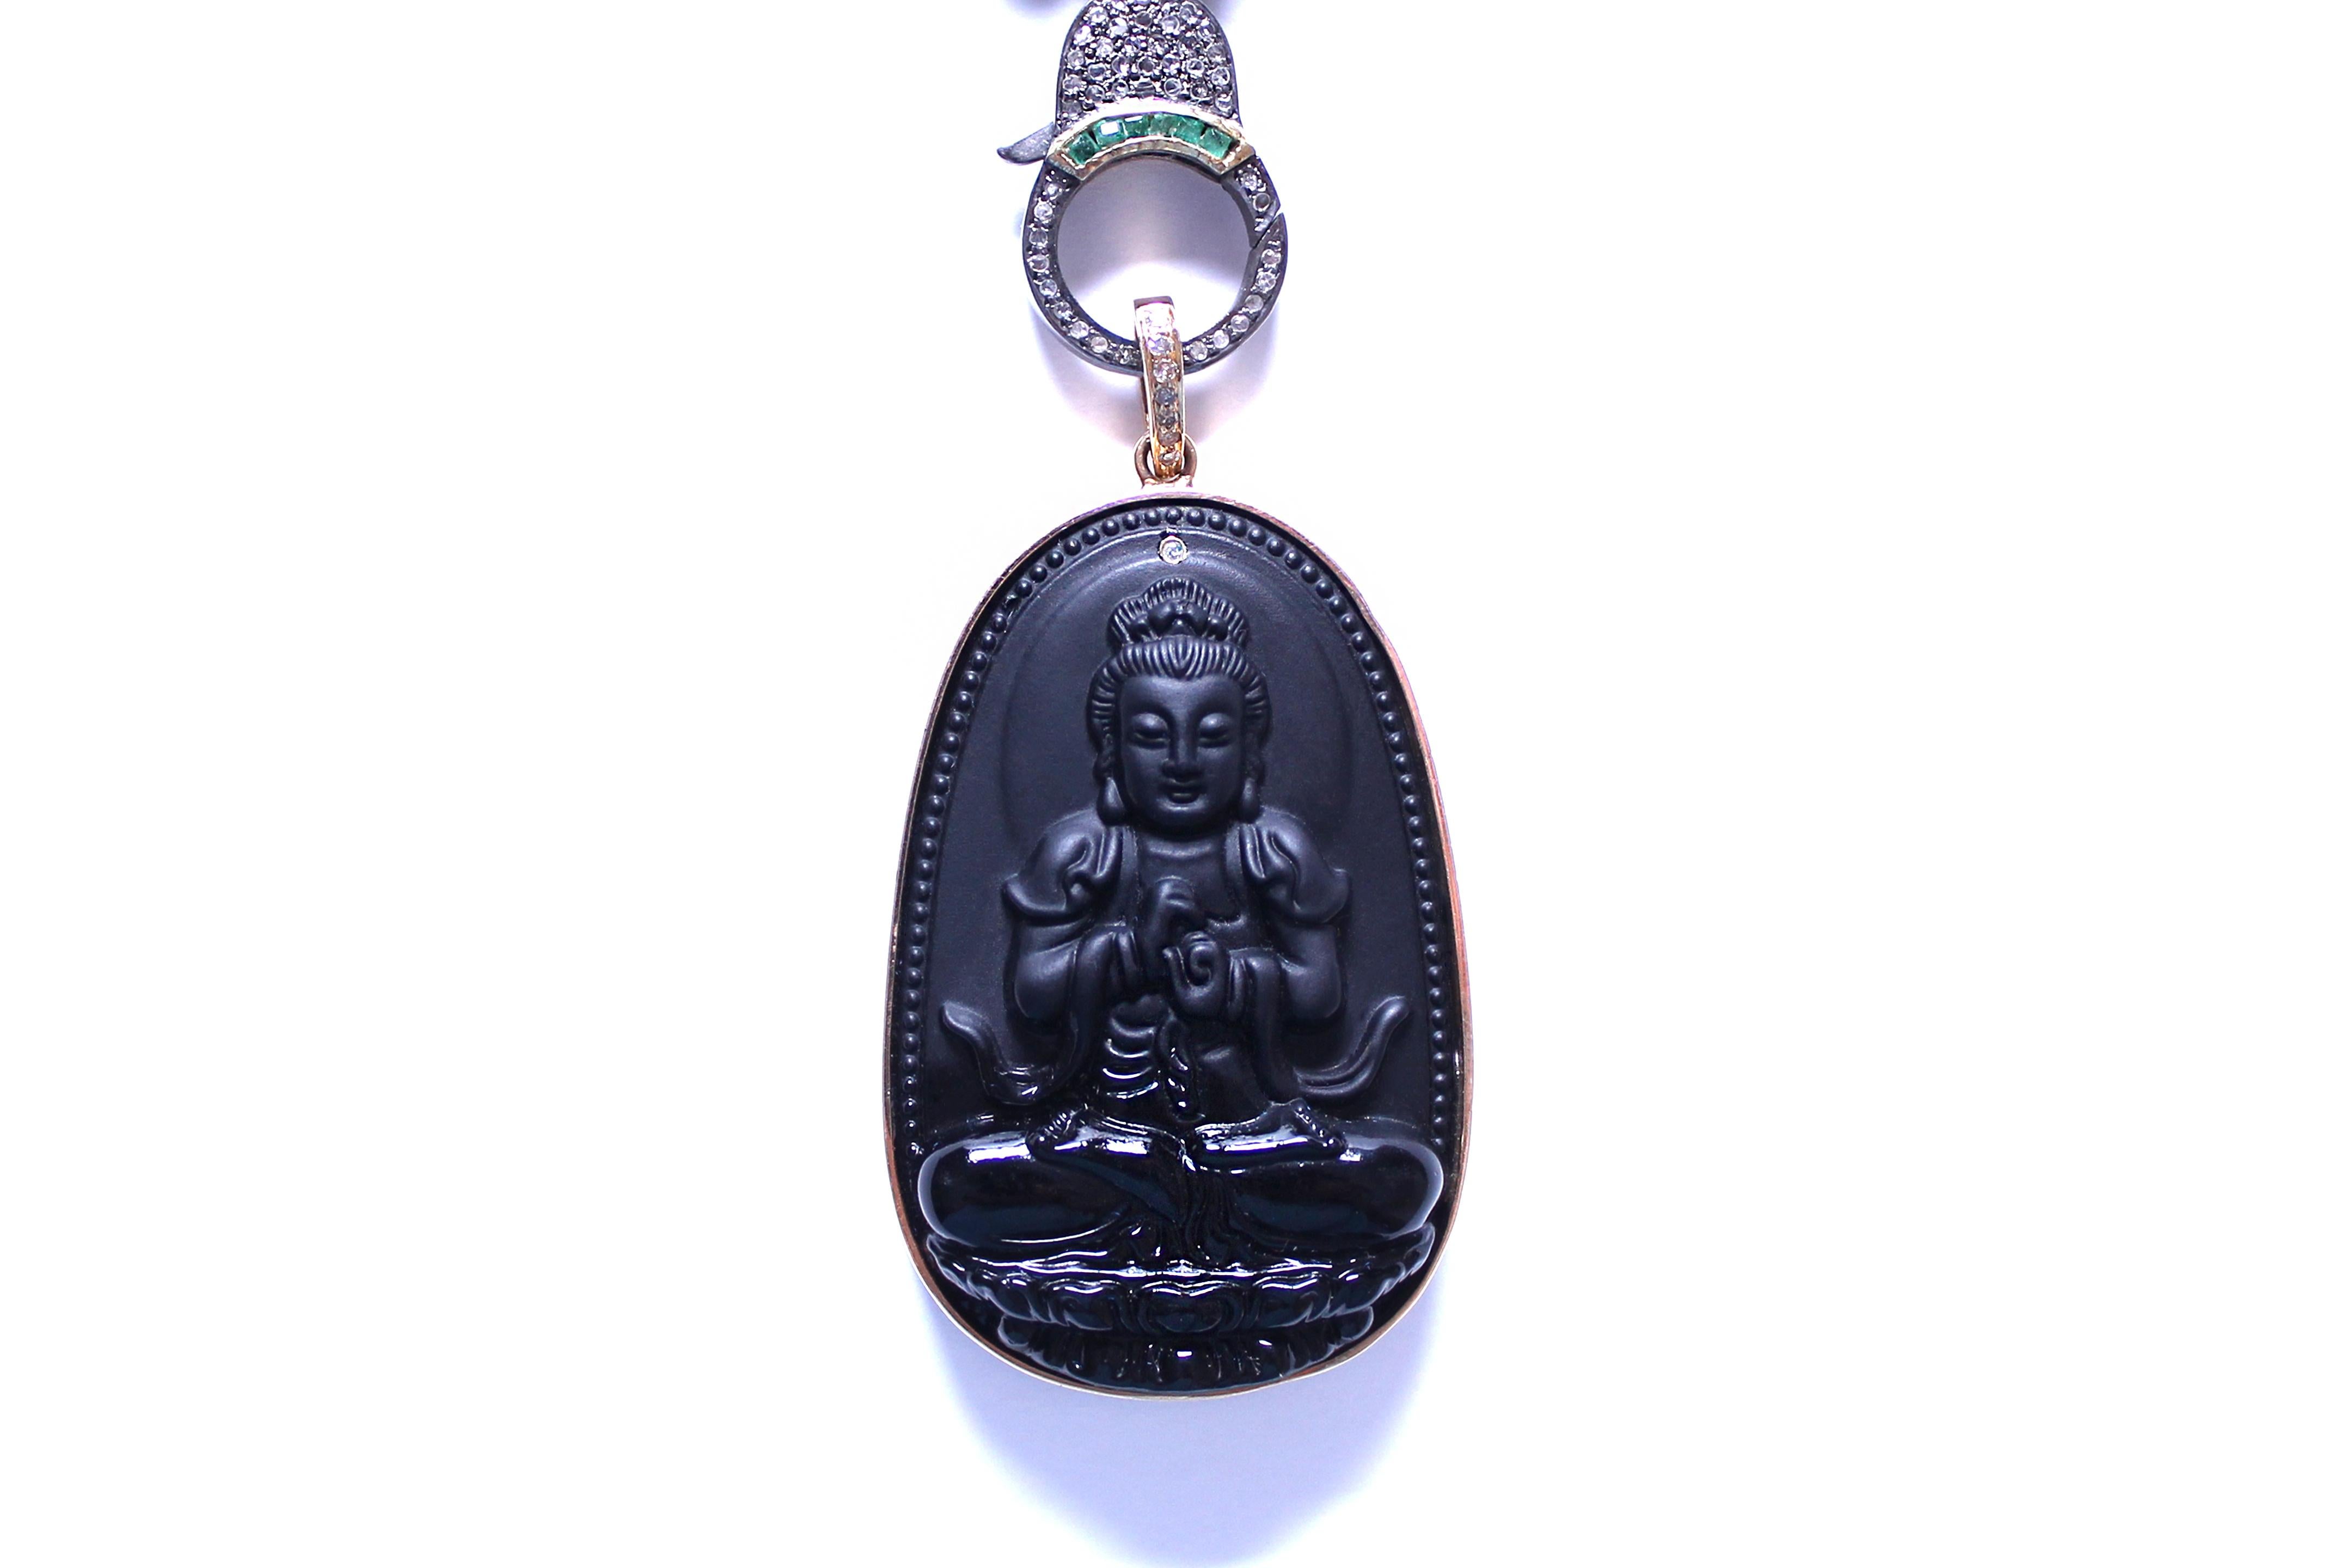 Pendant consists of:
Indonesian hand carved volcanic buddha rock. 14k gold frame. 14k gold bail with diamonds. 14k gold framed diamond on top. 
2